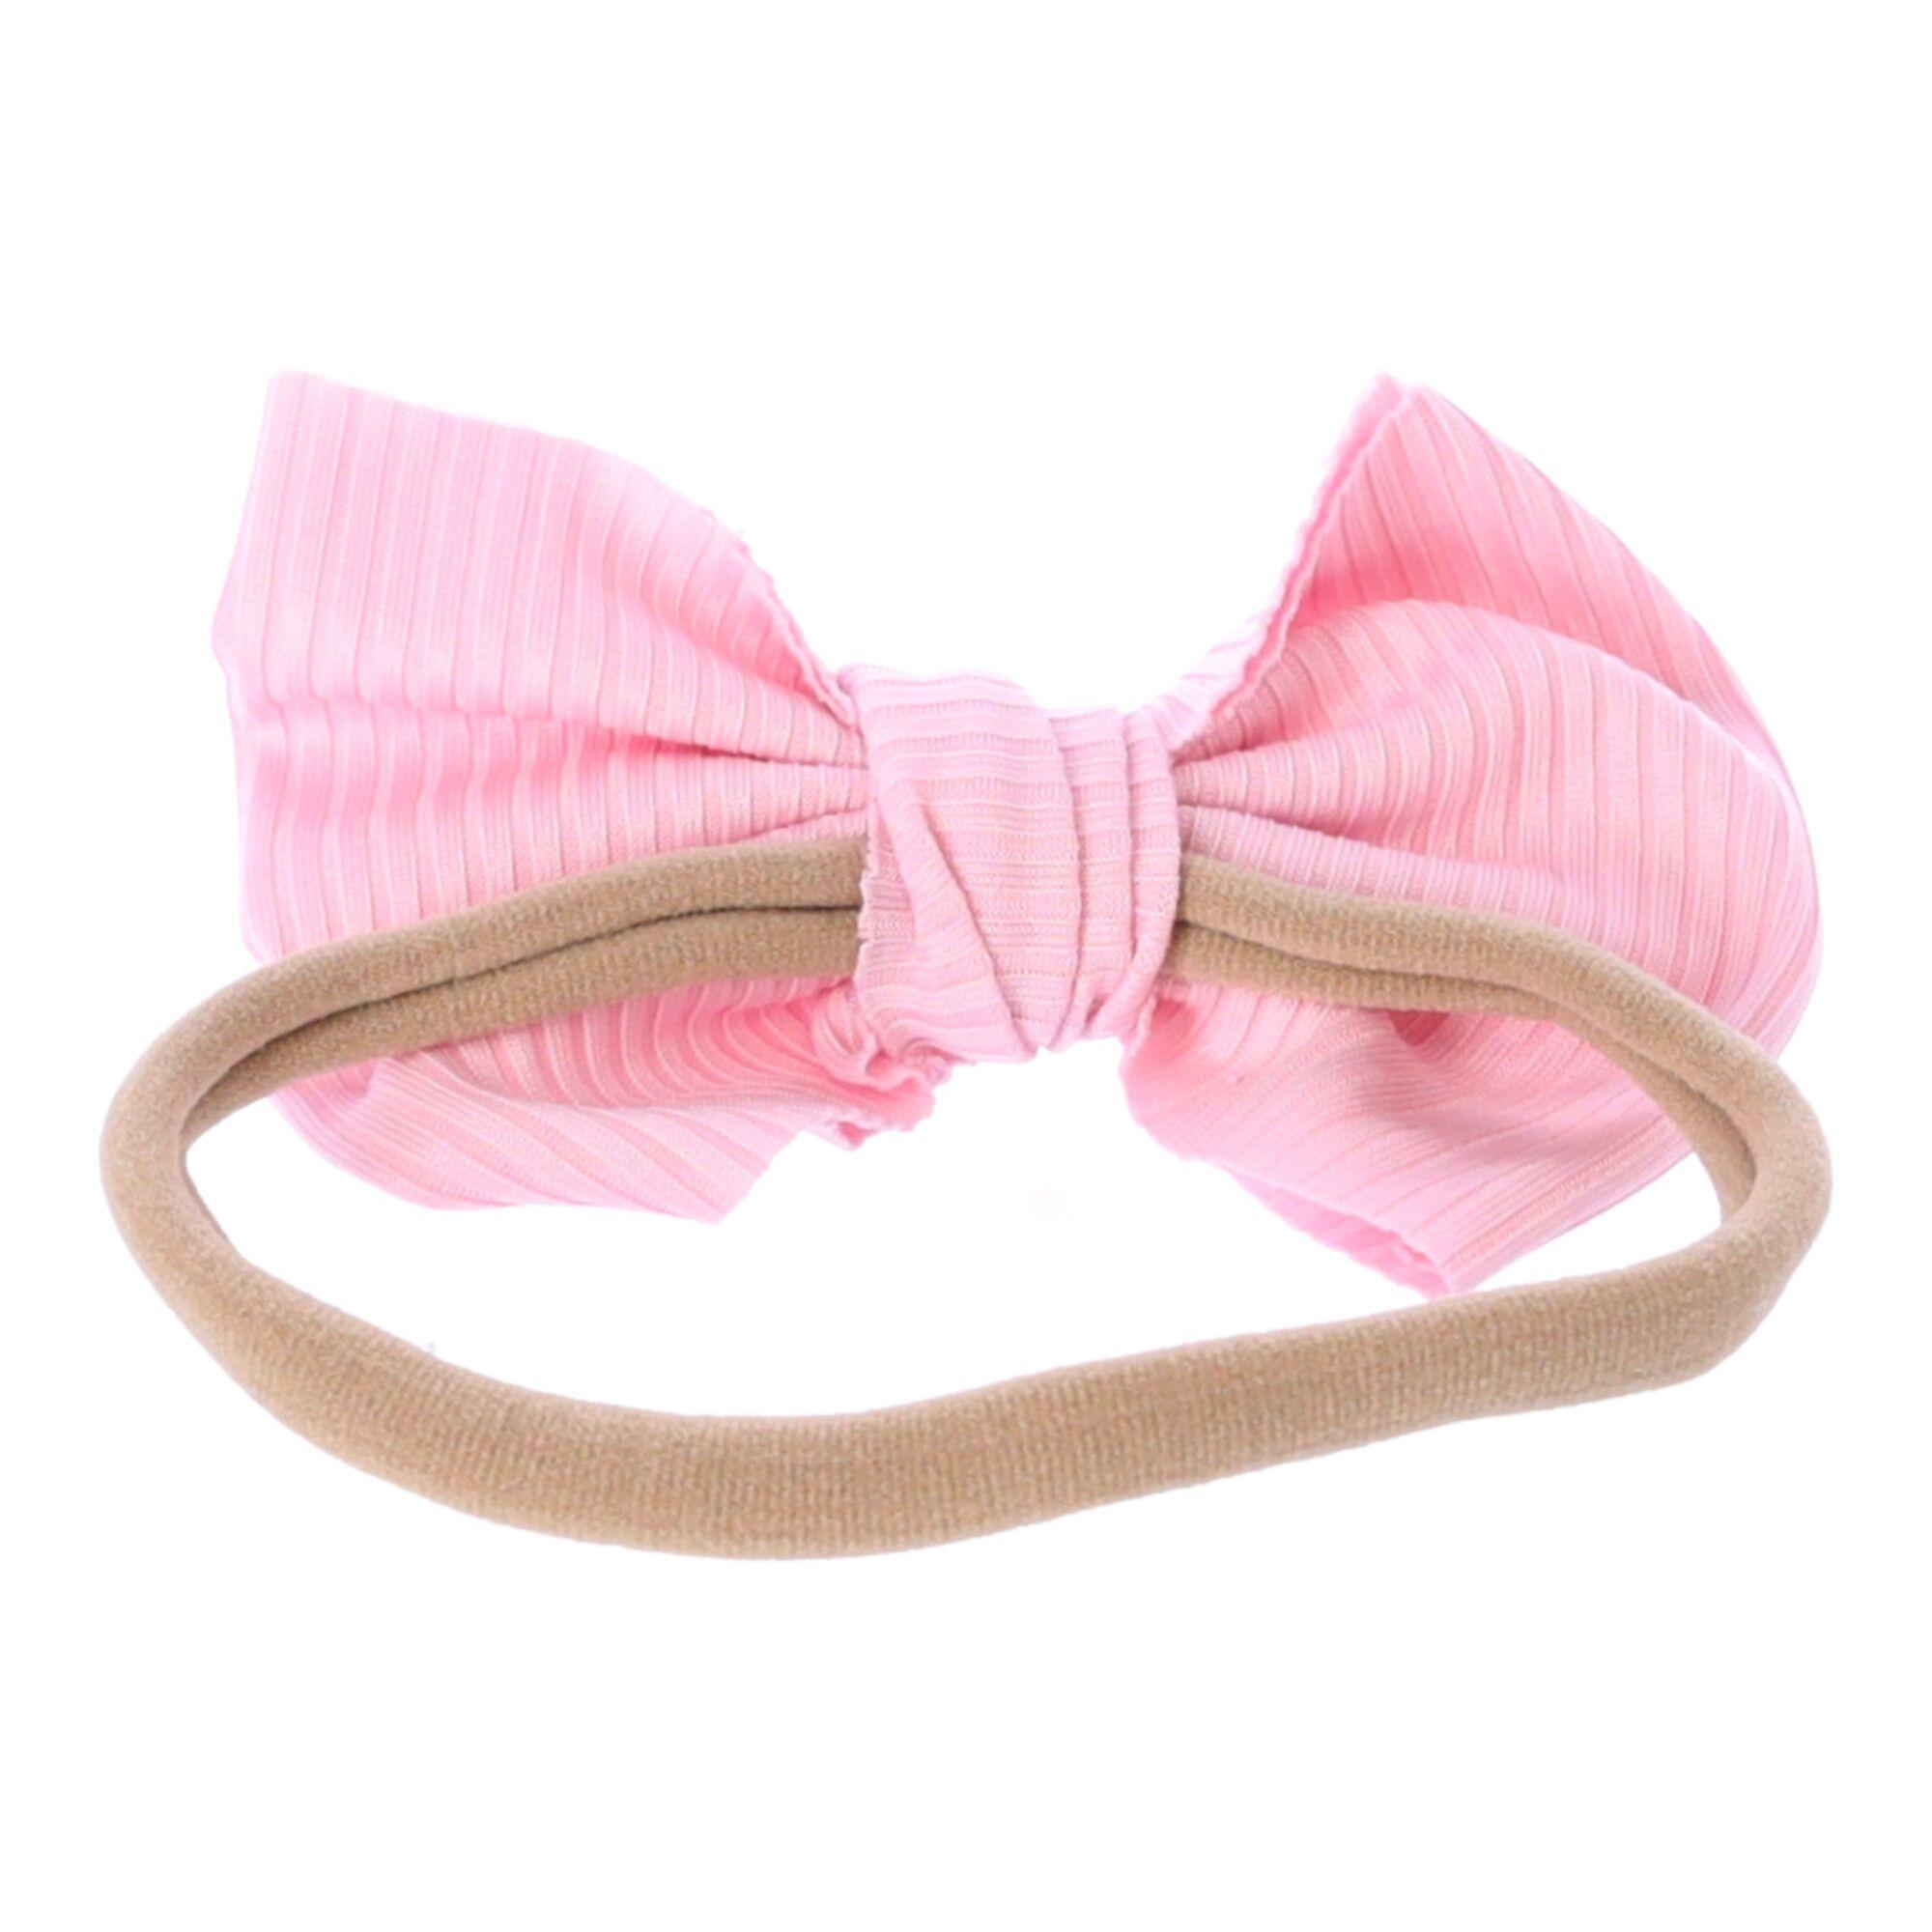 Baby headband with a bow - white